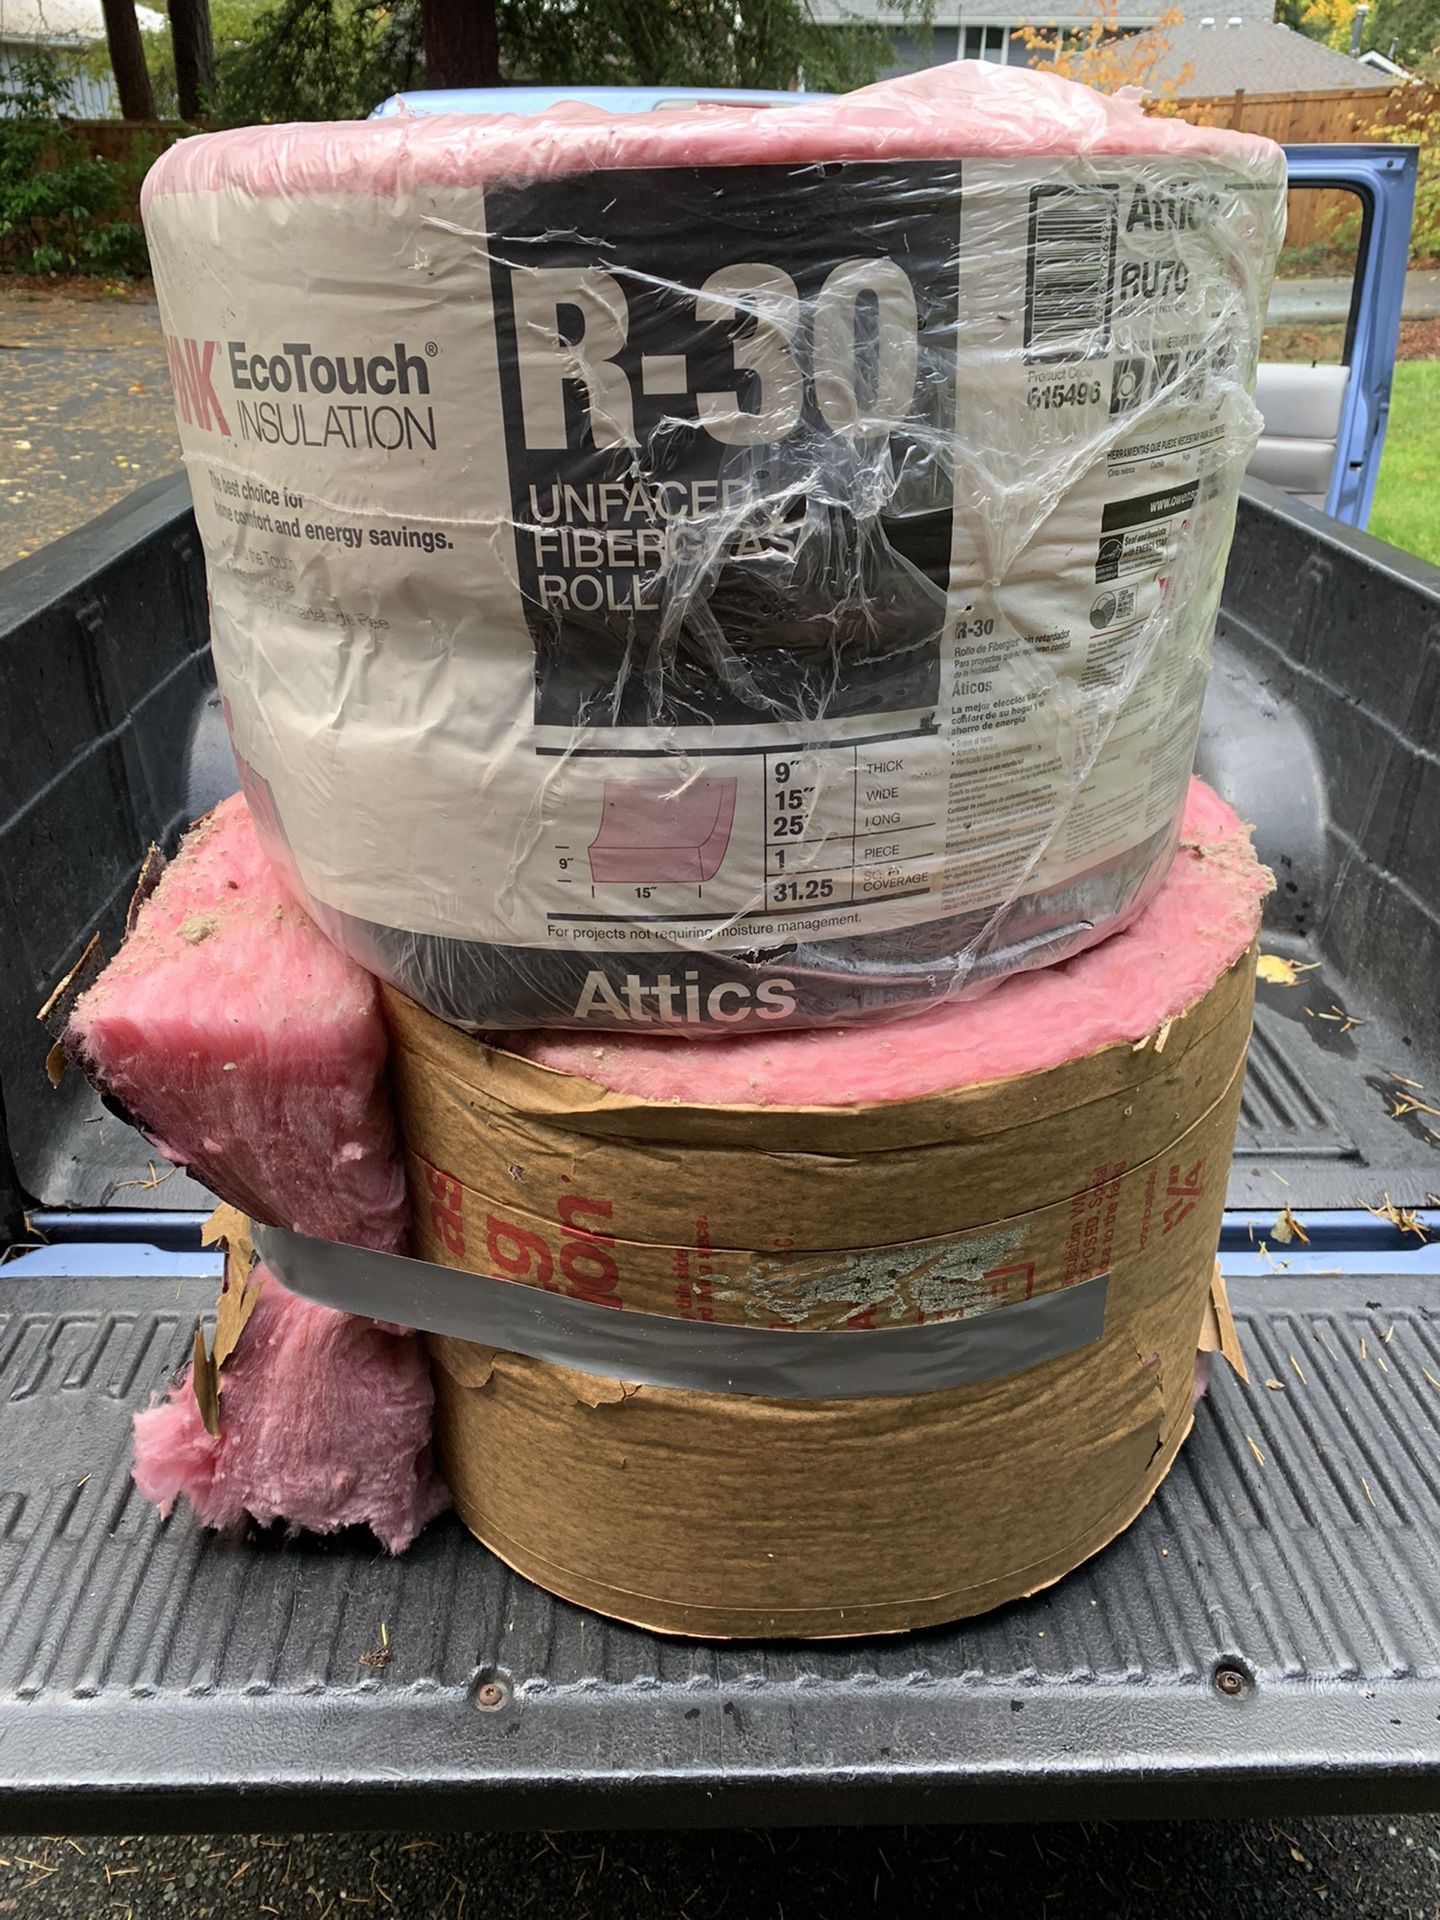 Free Insulation - 1 Unopened Roll, 1 Partial Roll